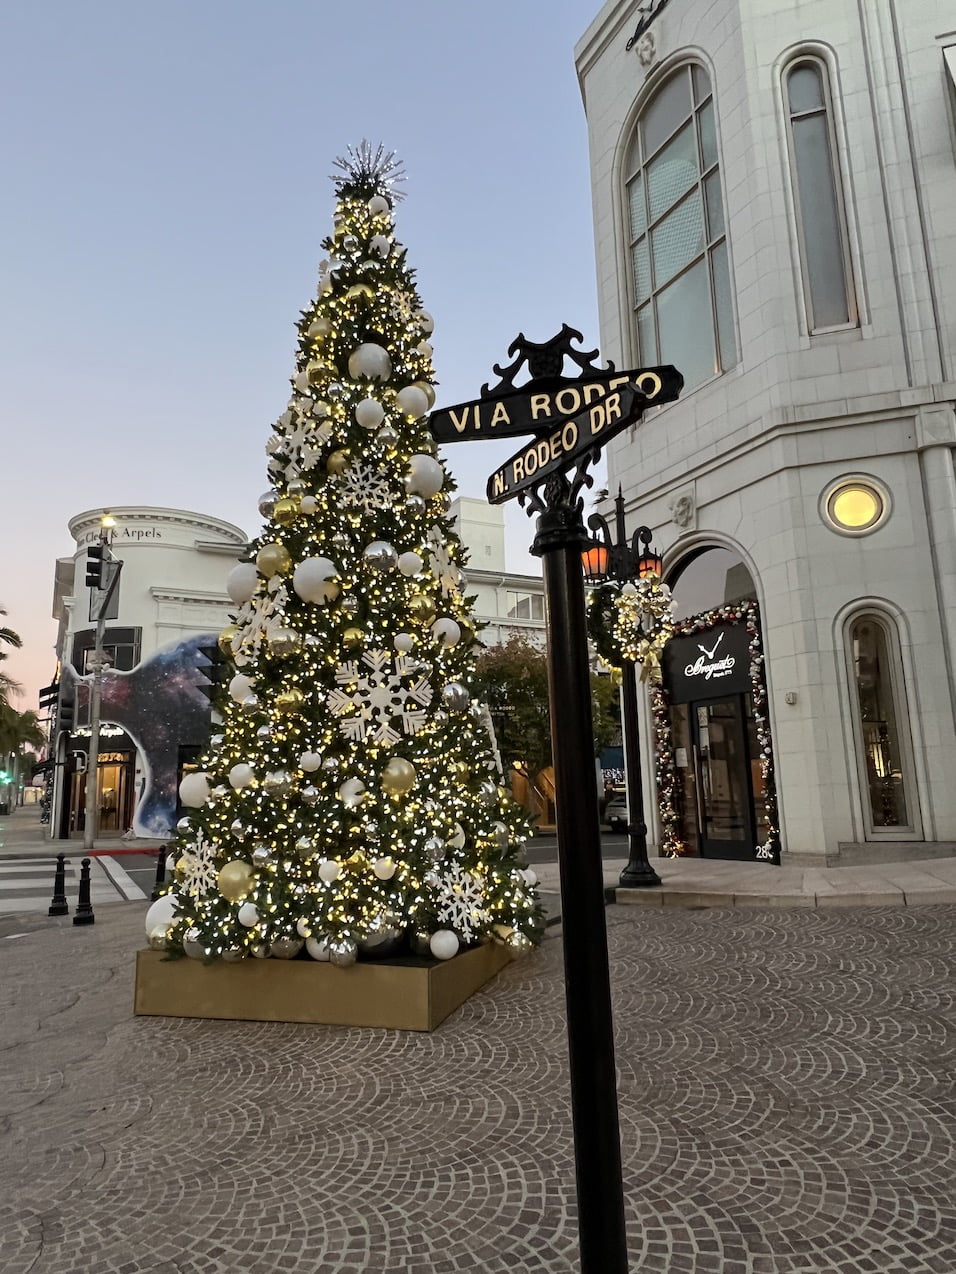 With Dior, Louis Vuitton and Cheval Blanc, Rodeo Drive begins its